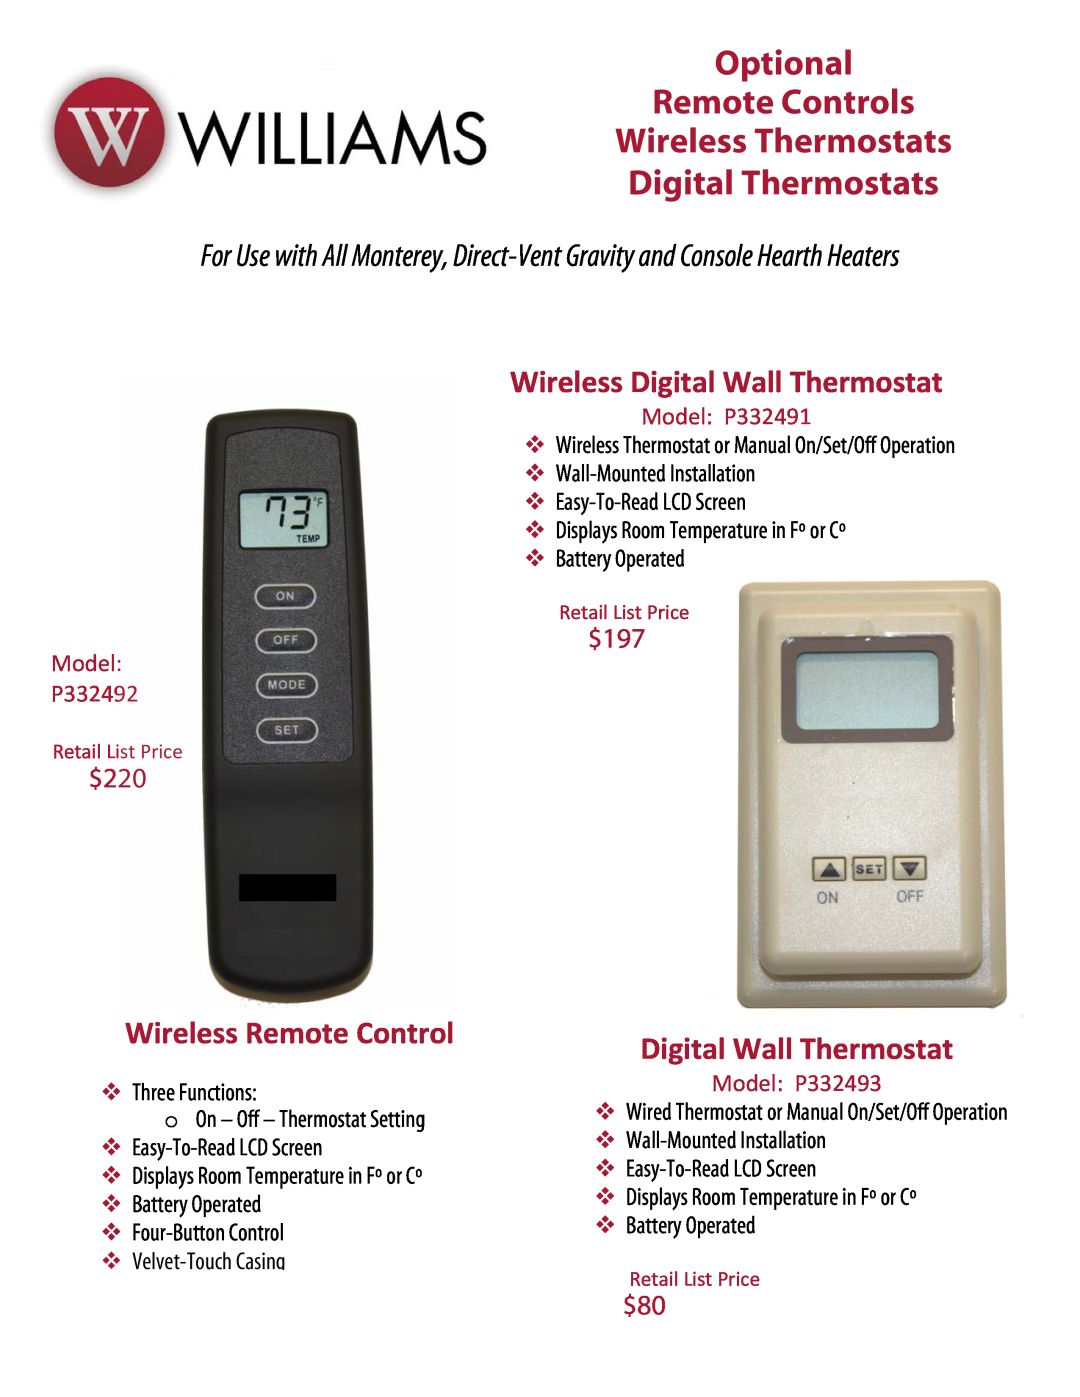 Williams 3003621 Optional Remote Controls Wireless Thermostats, Digital Thermostats, Wireless Digital Wall Thermostat 